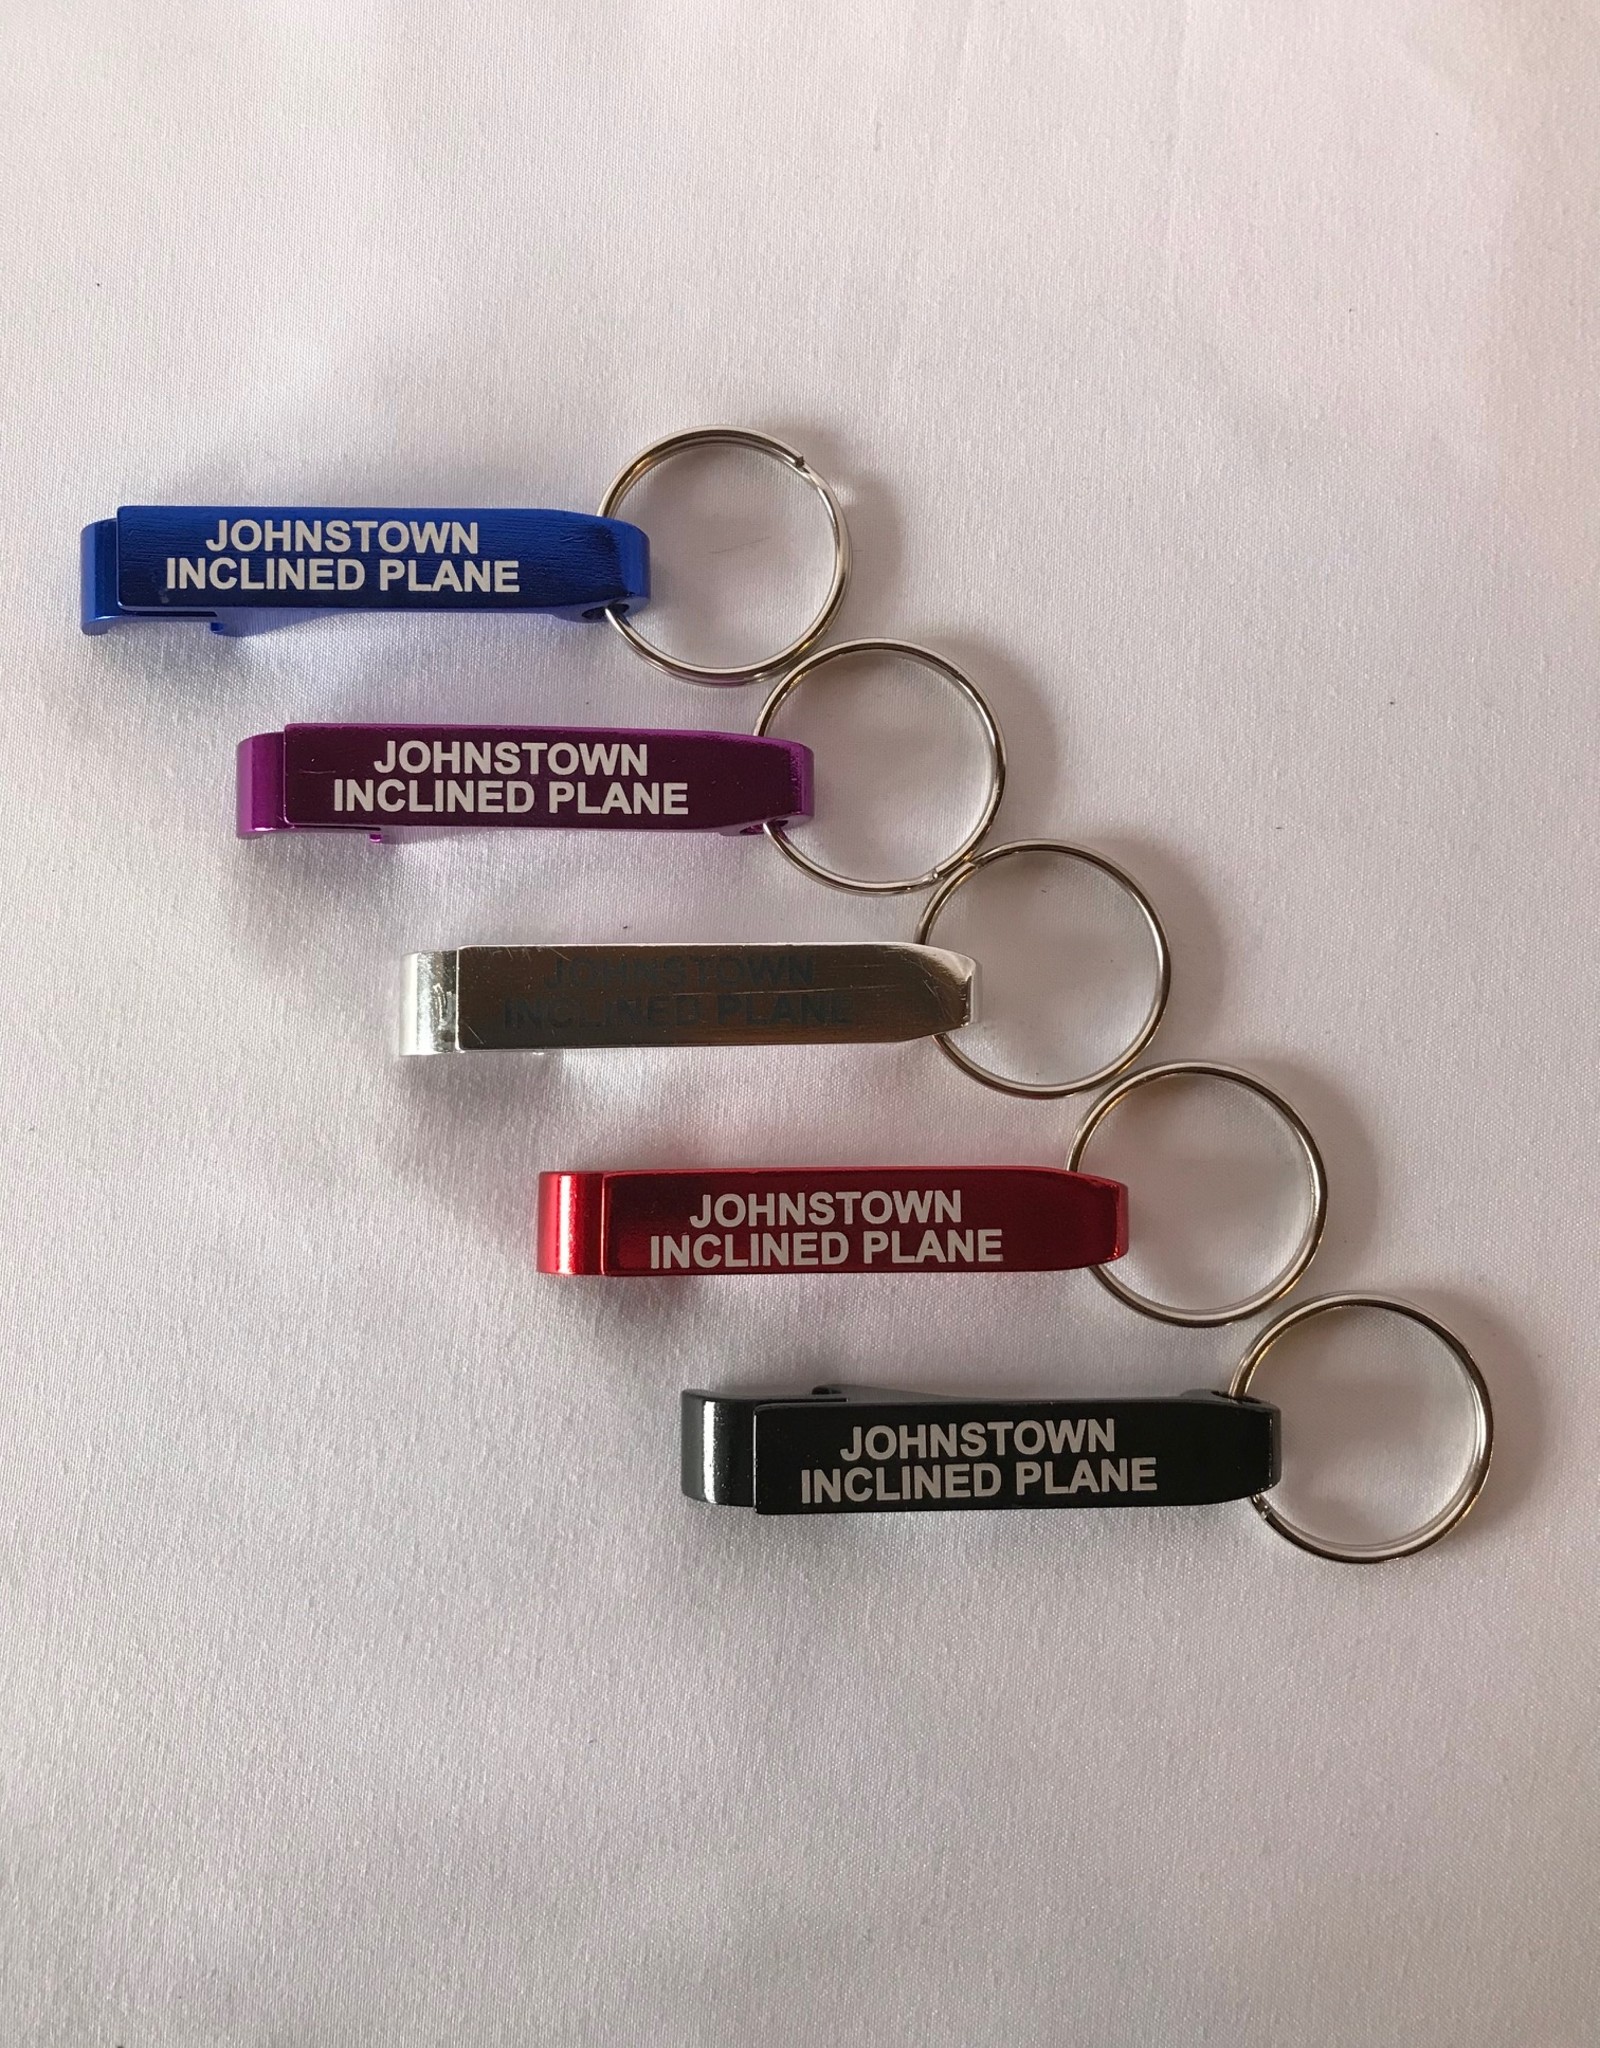 Can Opener Keychains